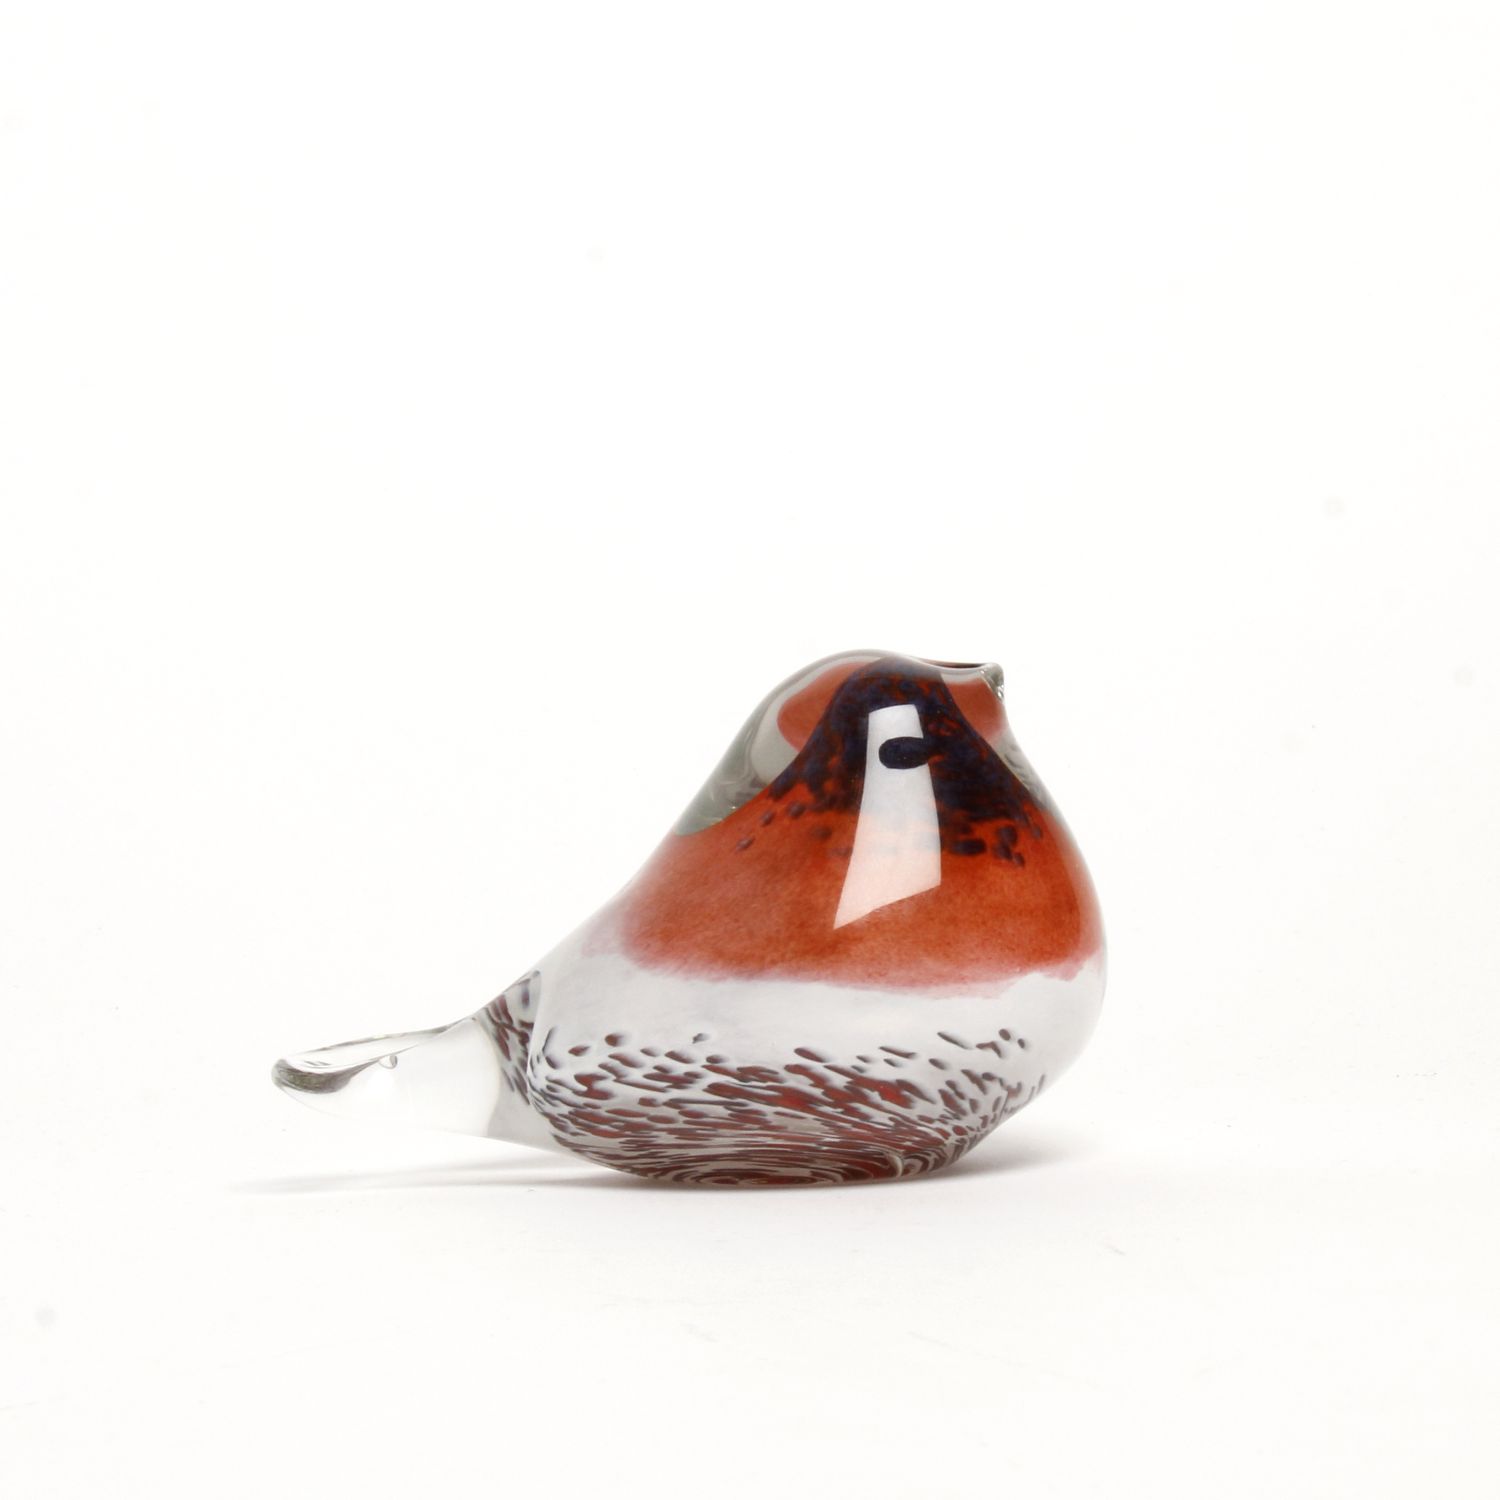 Victoria Guy: Fall Birds Product Image 4 of 4